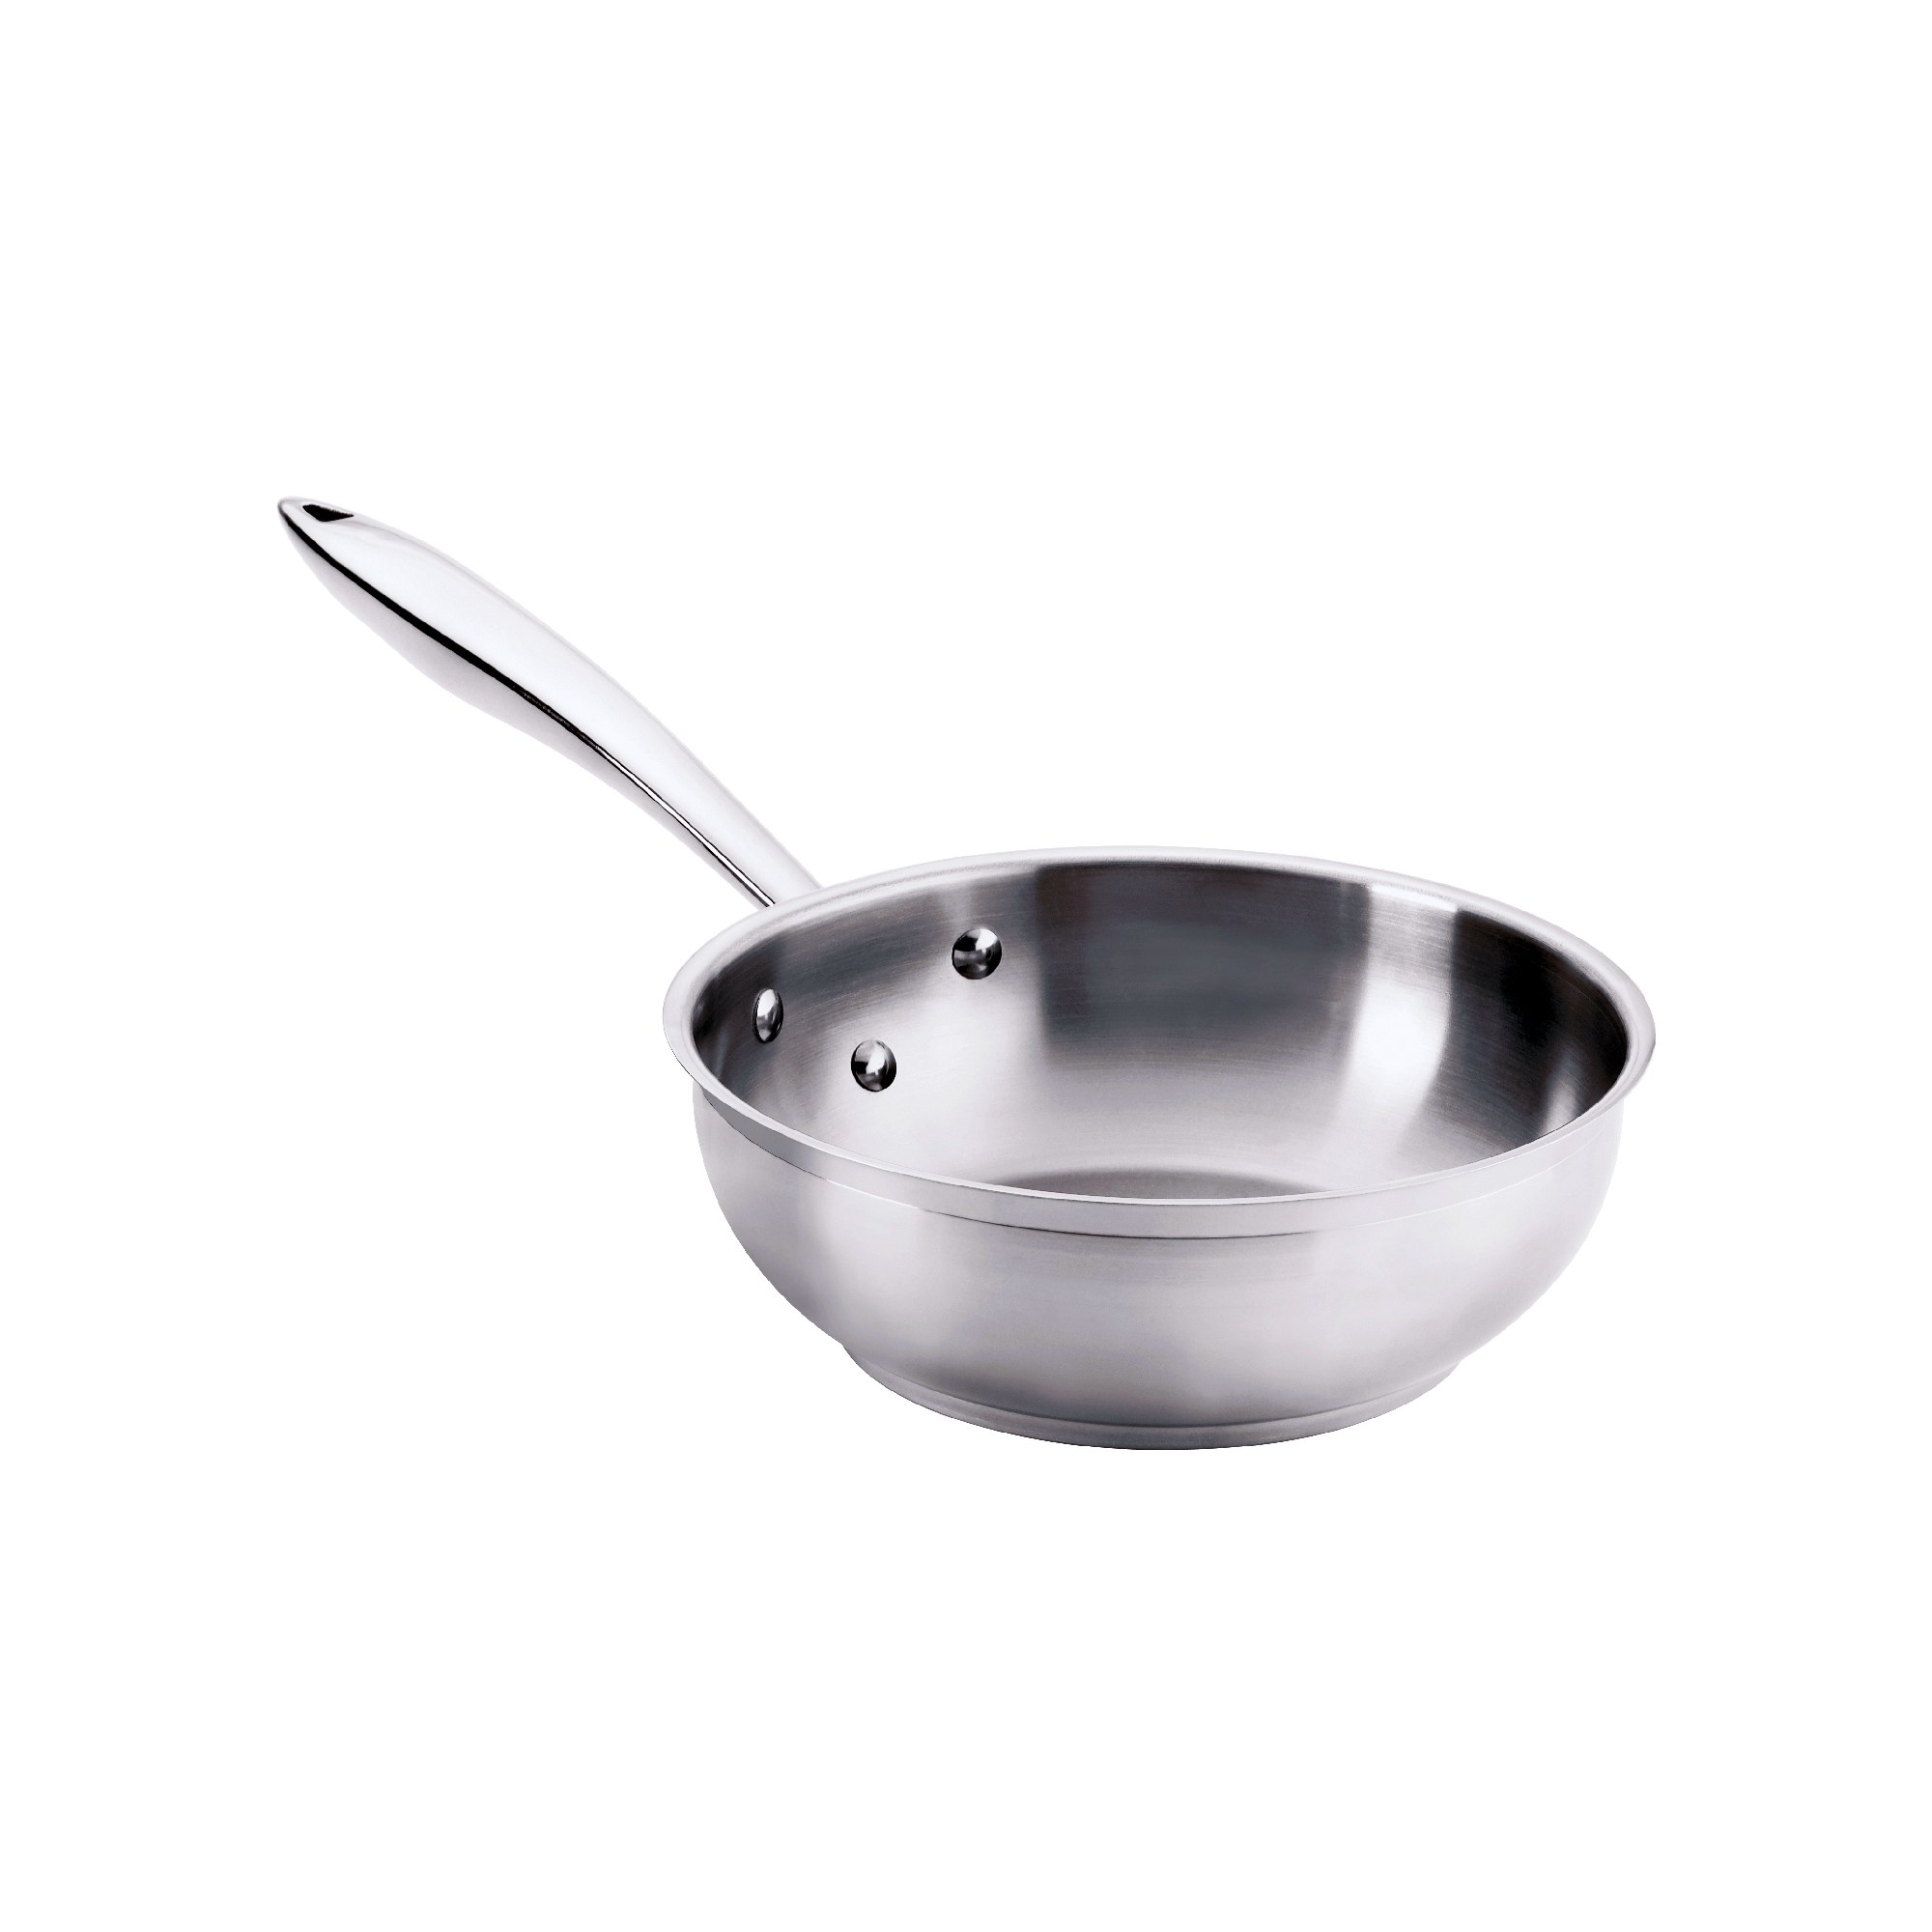 Theramlloy Stainless Steel Saute Pan 2 QT - 5724042 (Lid 5724120)